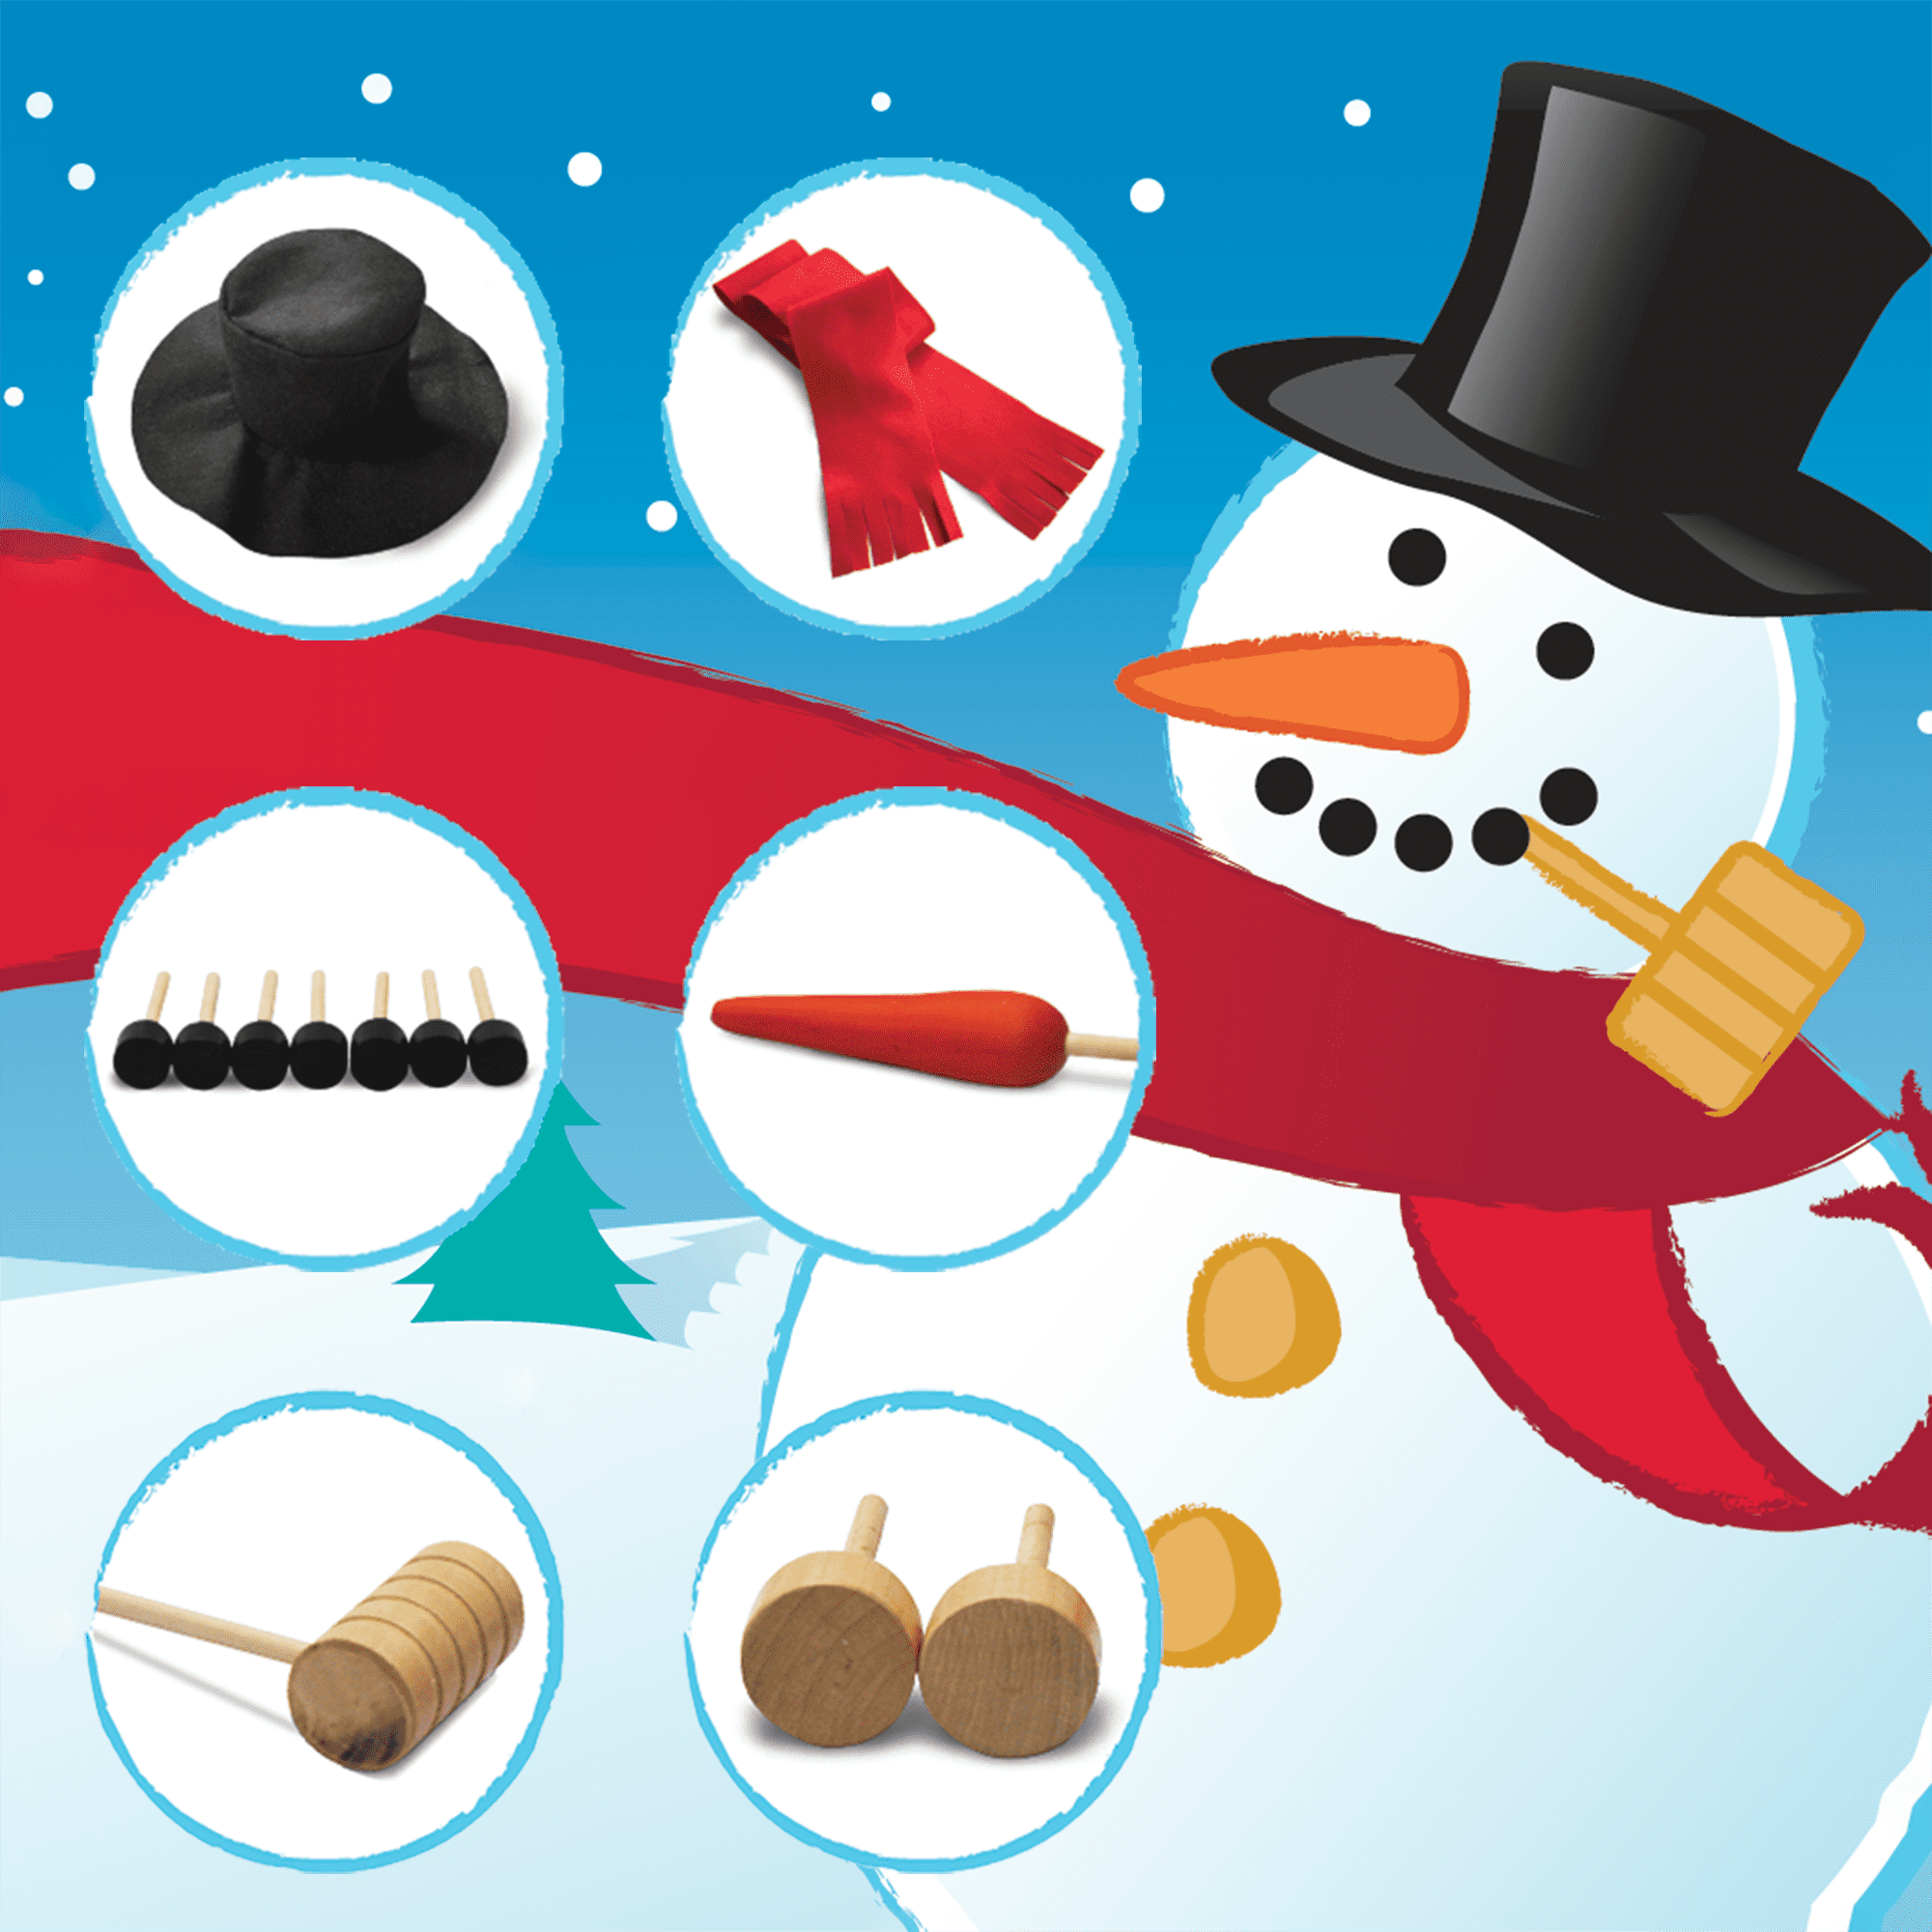 MinnARK Build Your Own Snowman Kit - Snowman Accessories for Children's Snow and Sled Play